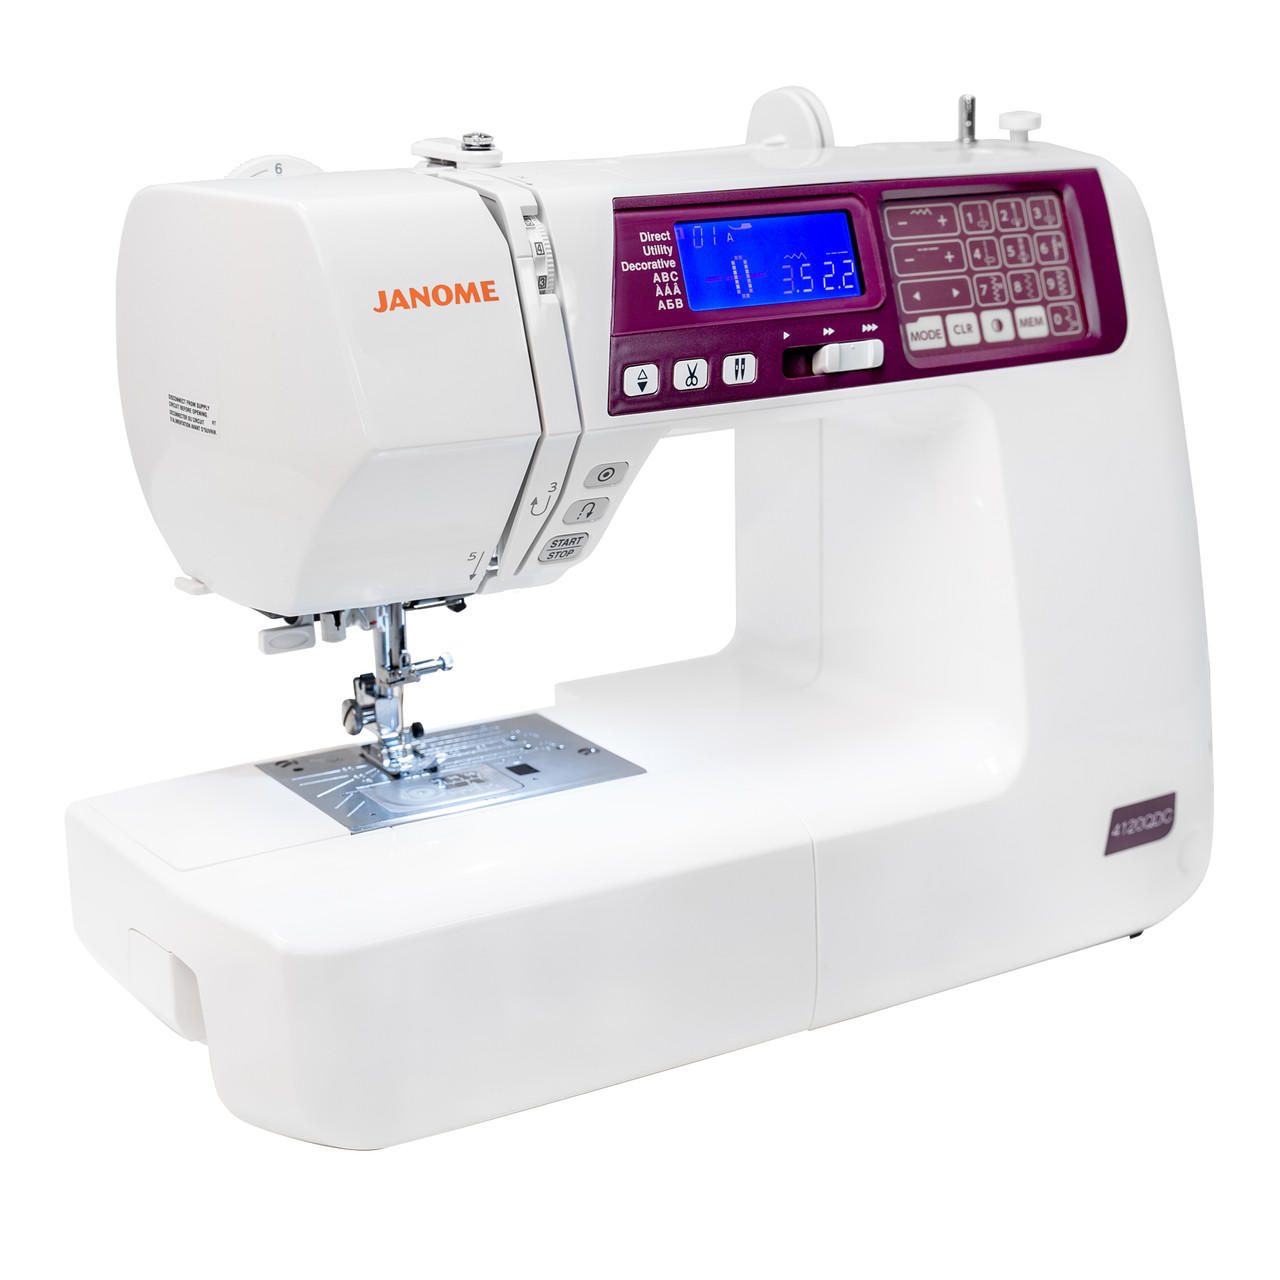 Janome Portable Easy-to-Use 5-Pound Mechanical Sewing Machine & Reviews